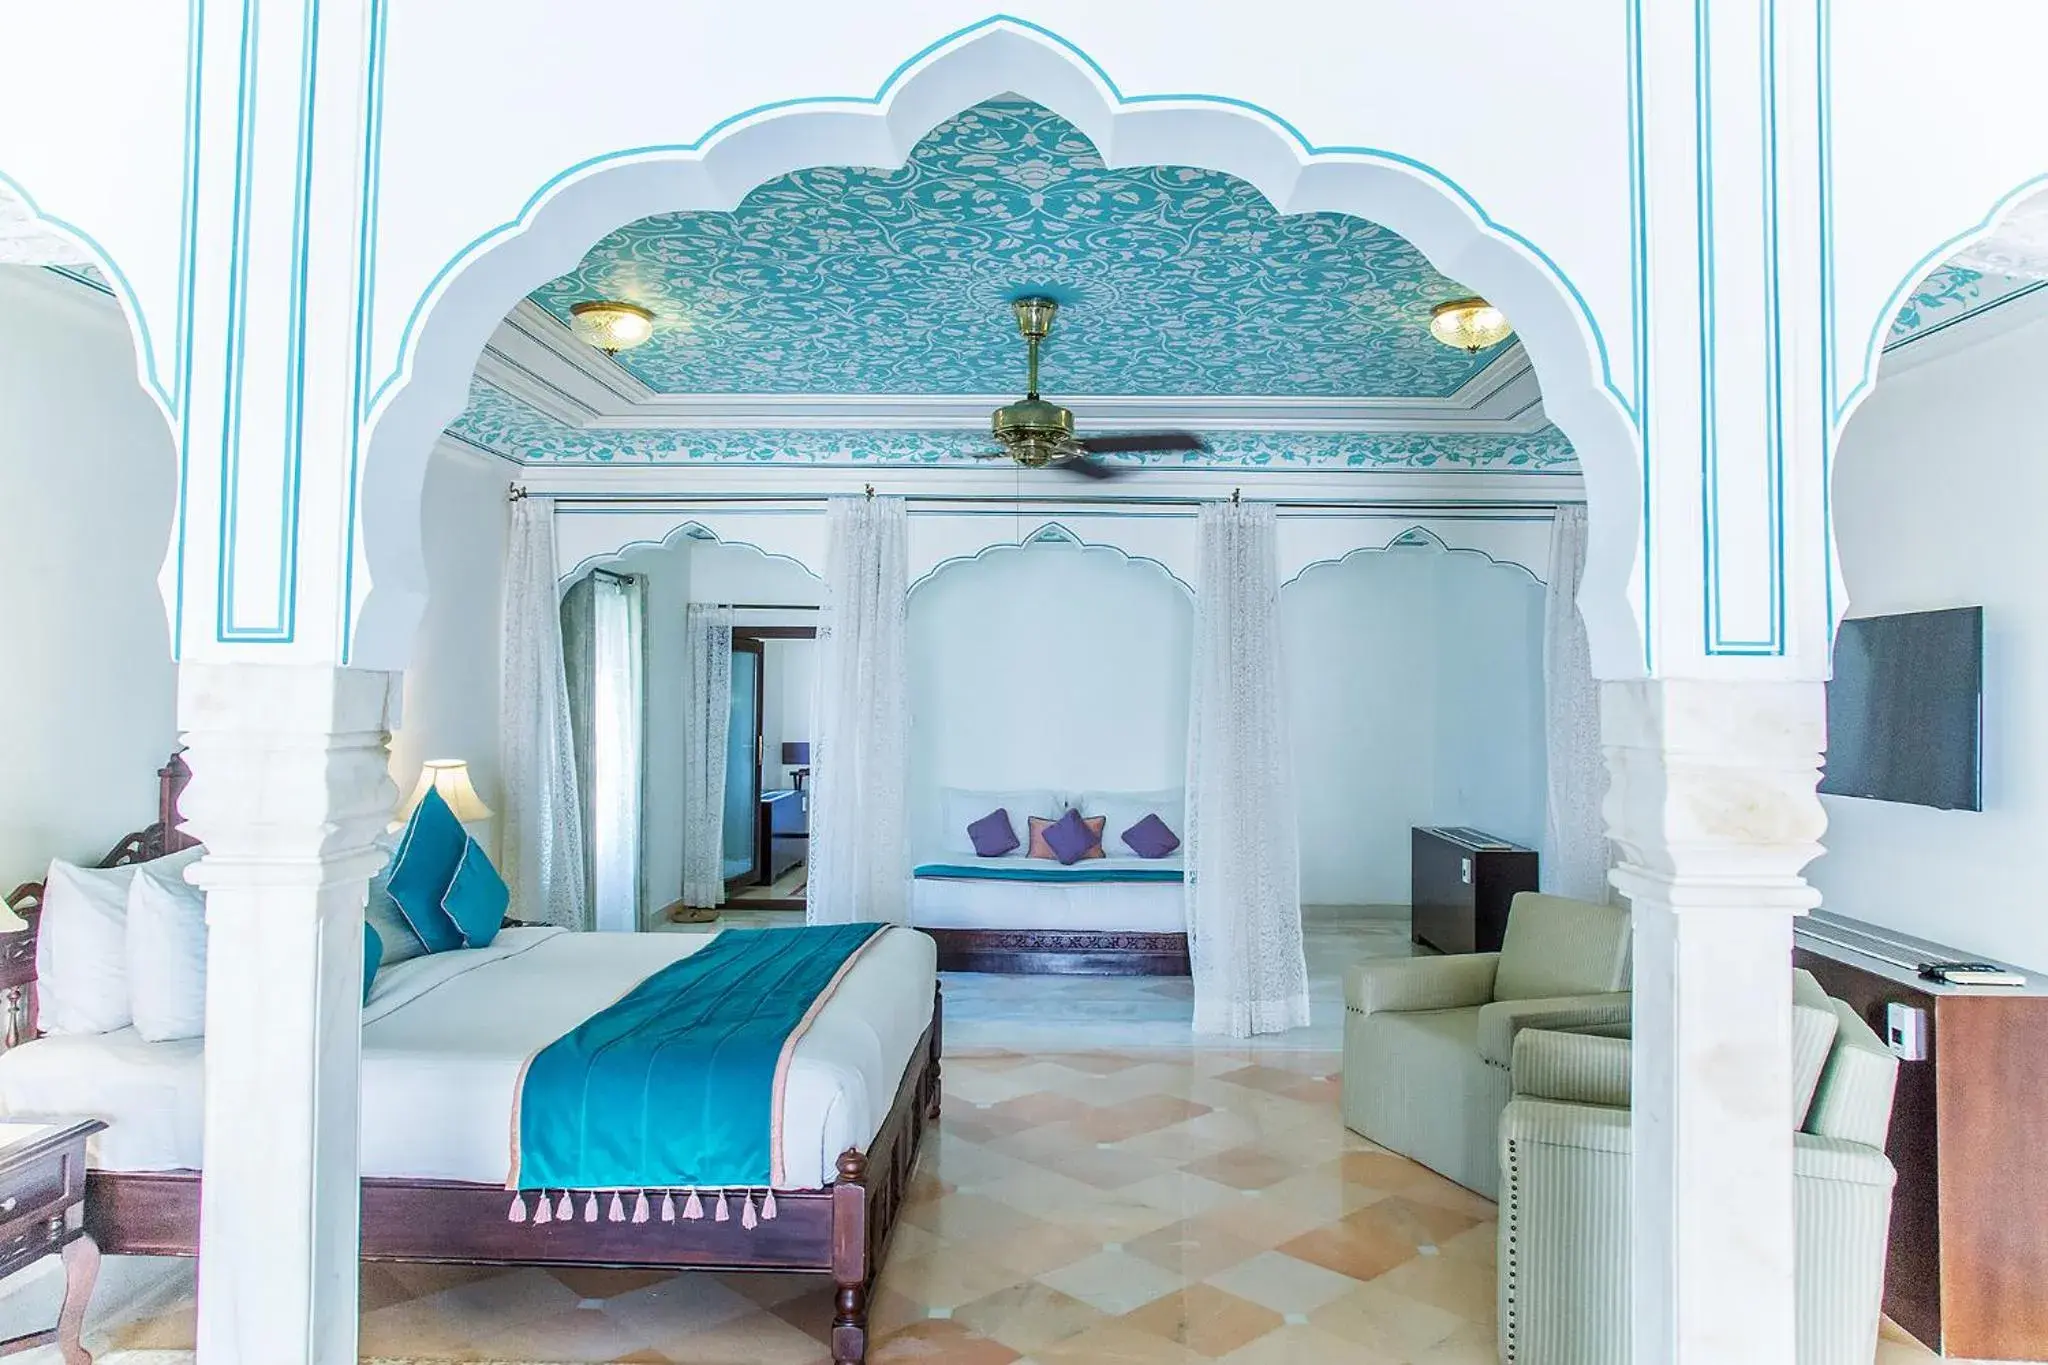 Photo of the whole room in Royal Heritage Haveli